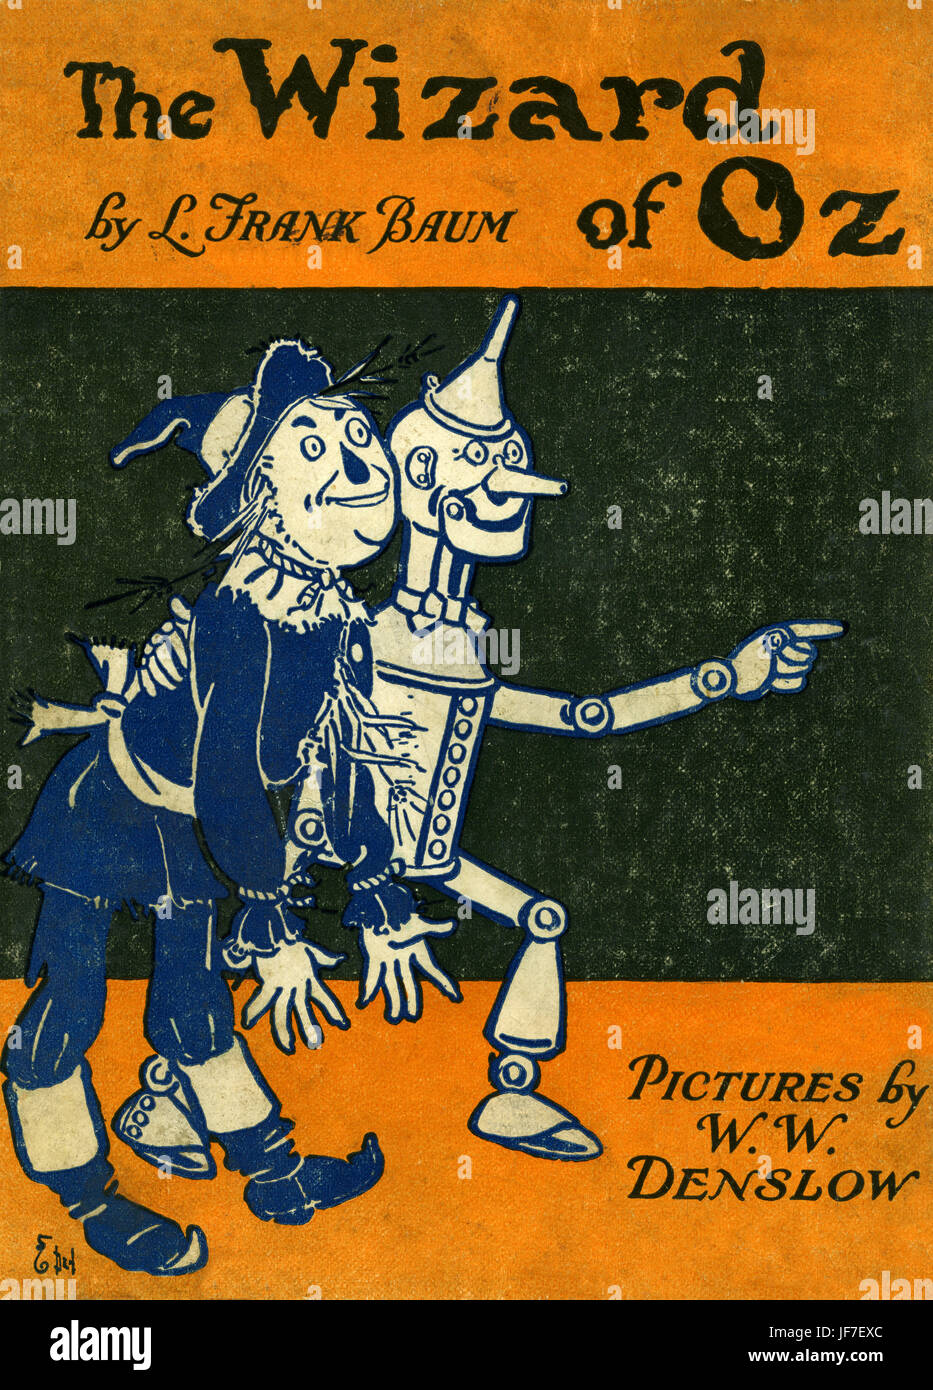 The Wizard of Oz by L. Frank Baum book cover. Cover illustration by W.W. Denslow. Published by Bobbs Merill. American author, 15 May 1856 – 6 May 1919 Stock Photo